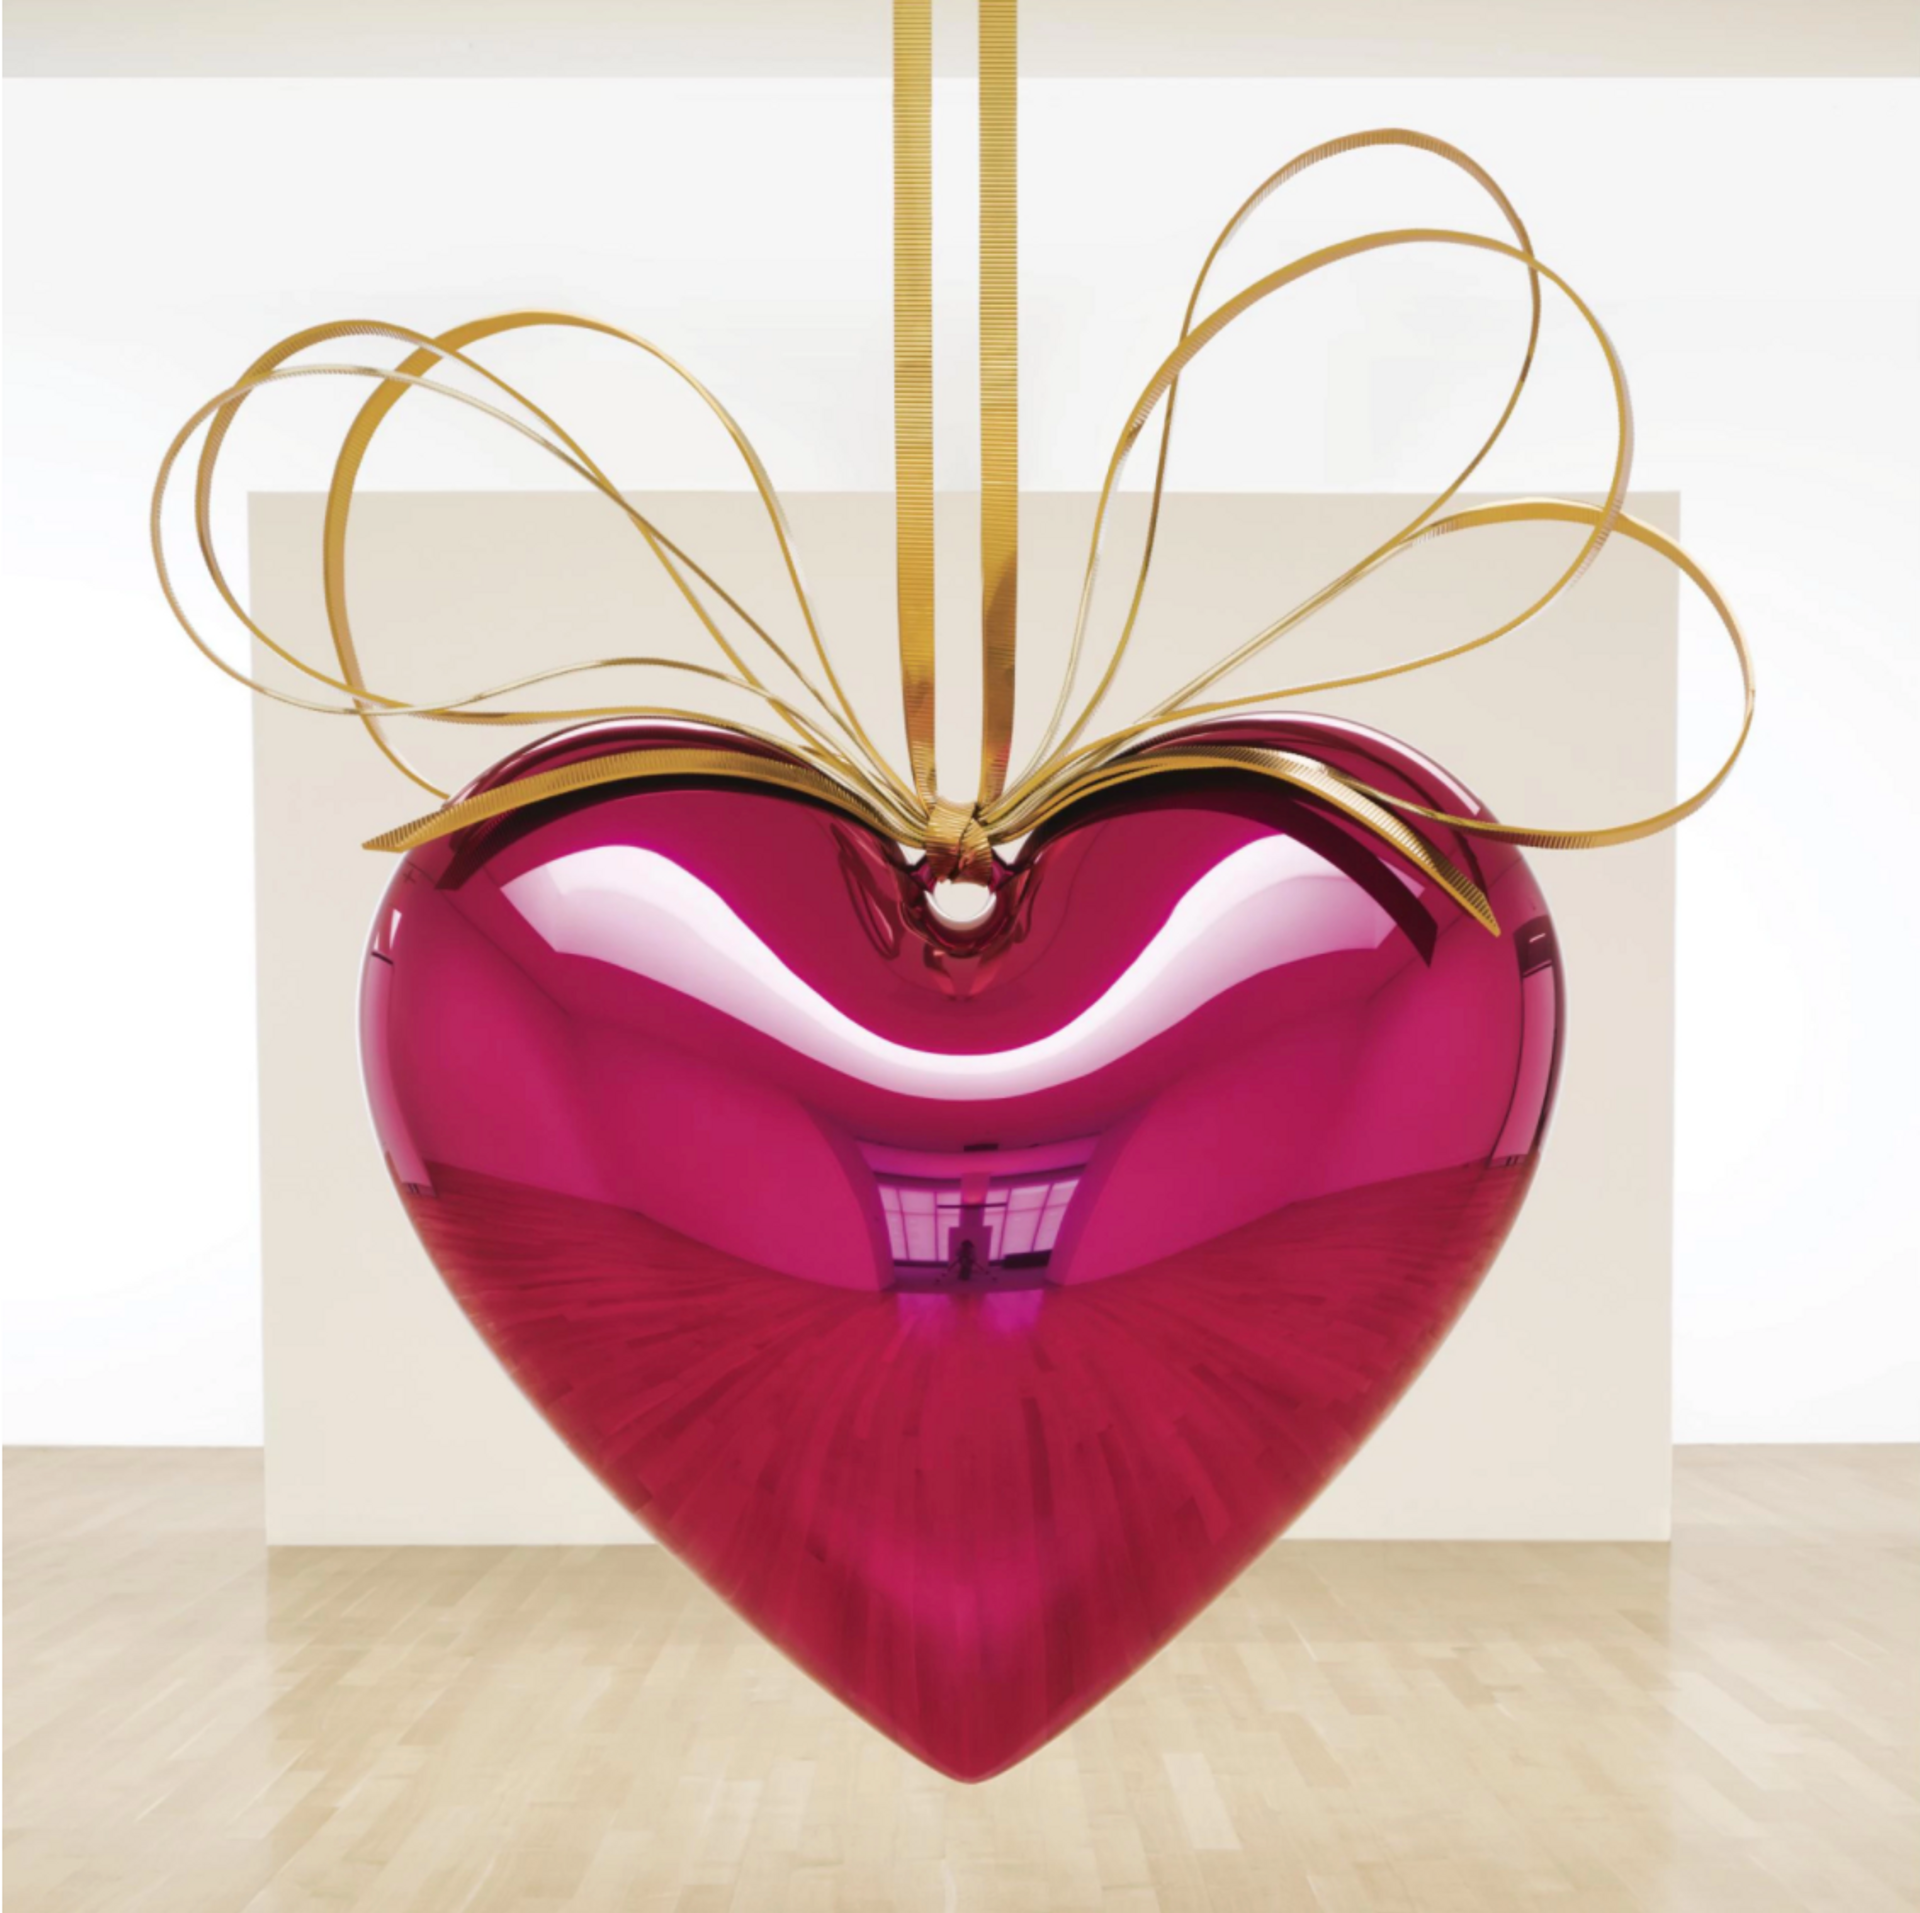 Hanging Heart (Magenta/Gold) by Jeff Koons